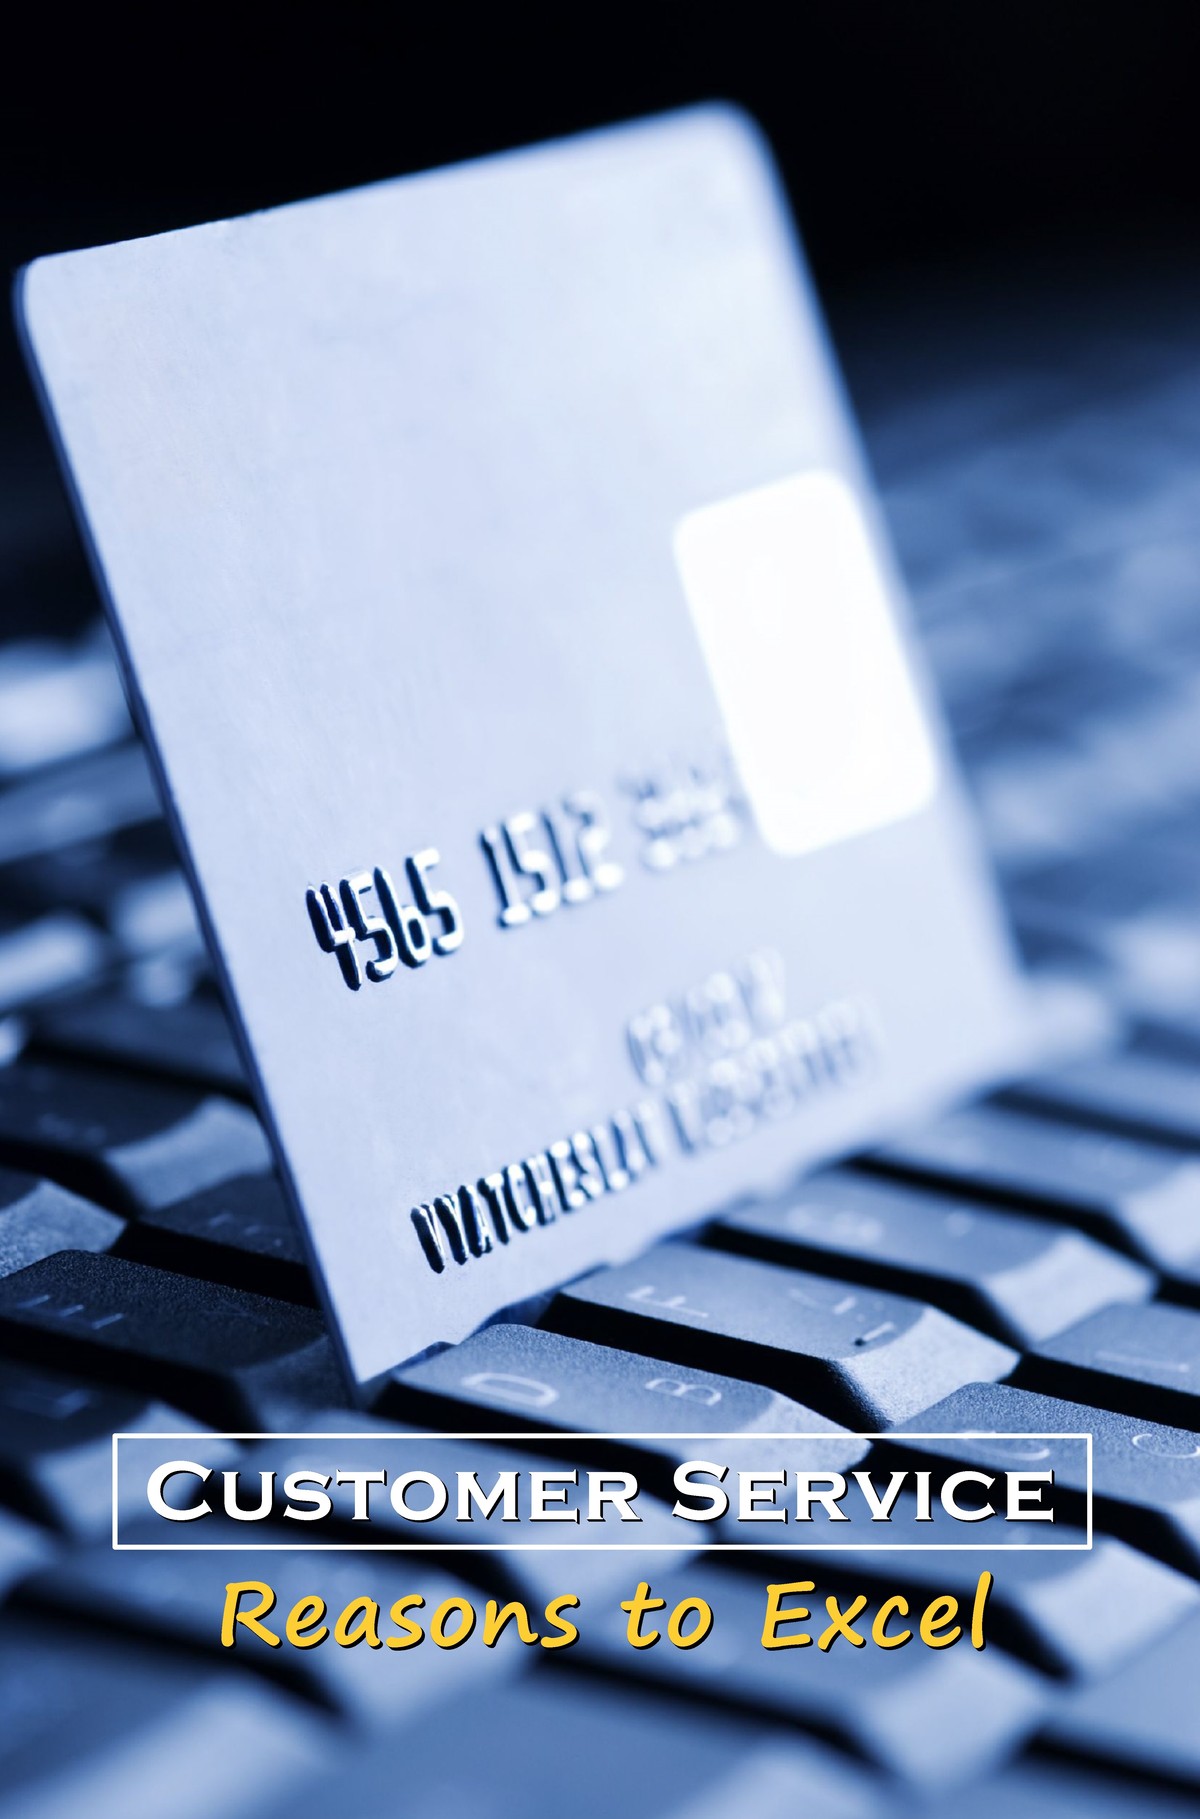 L7007 - Customer Service Reasons to Excel